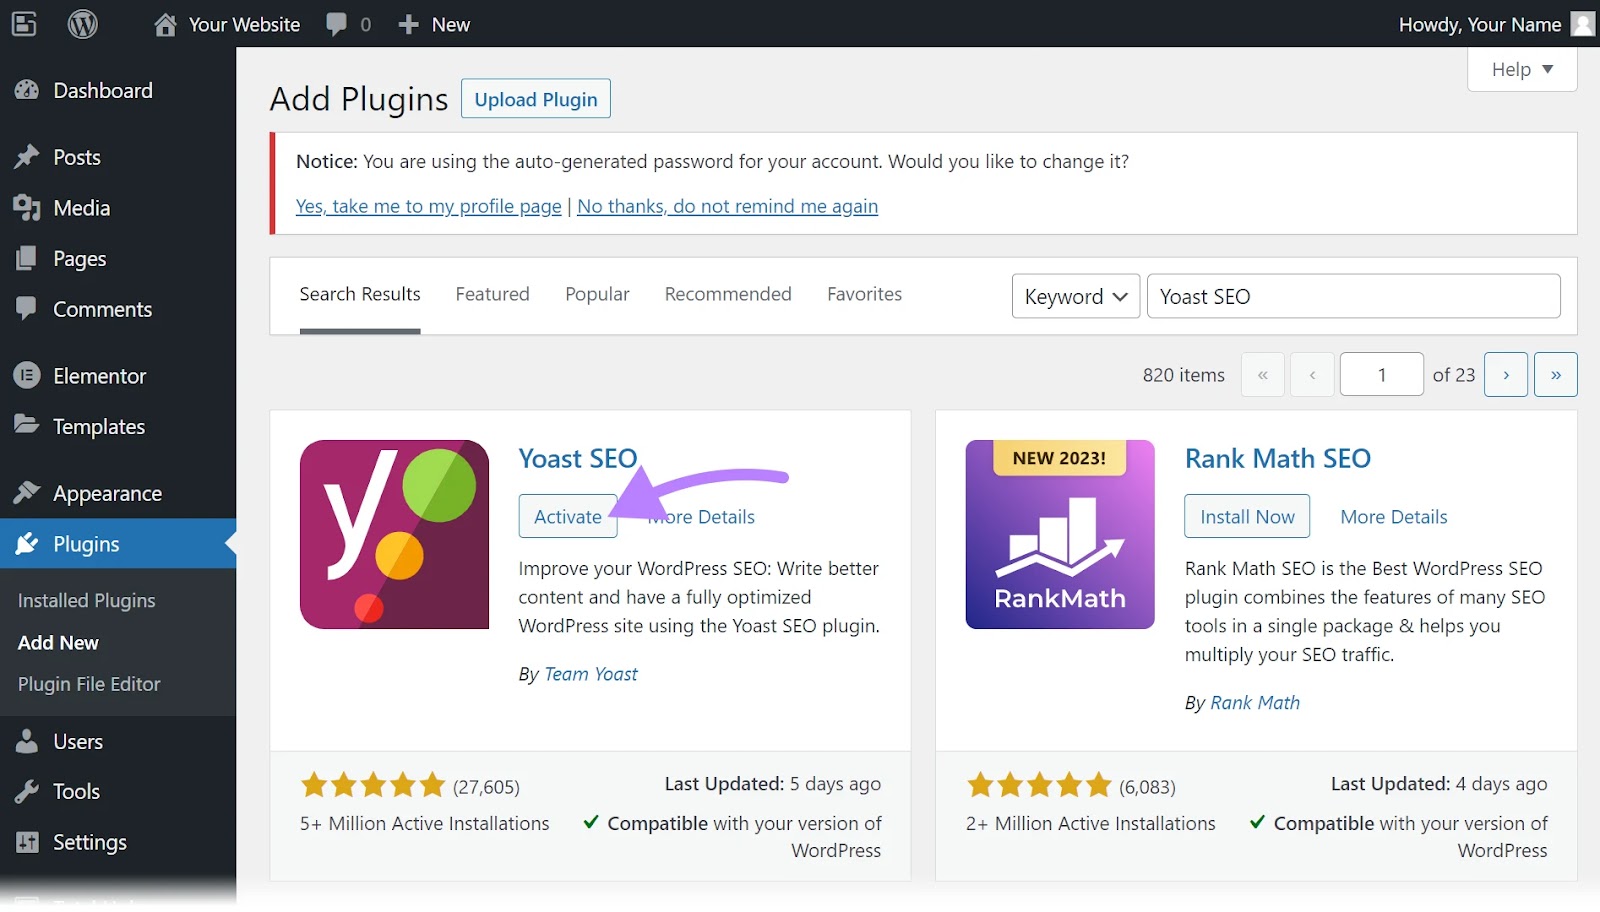 "Activate" button selected under "Yoast SEO" widget